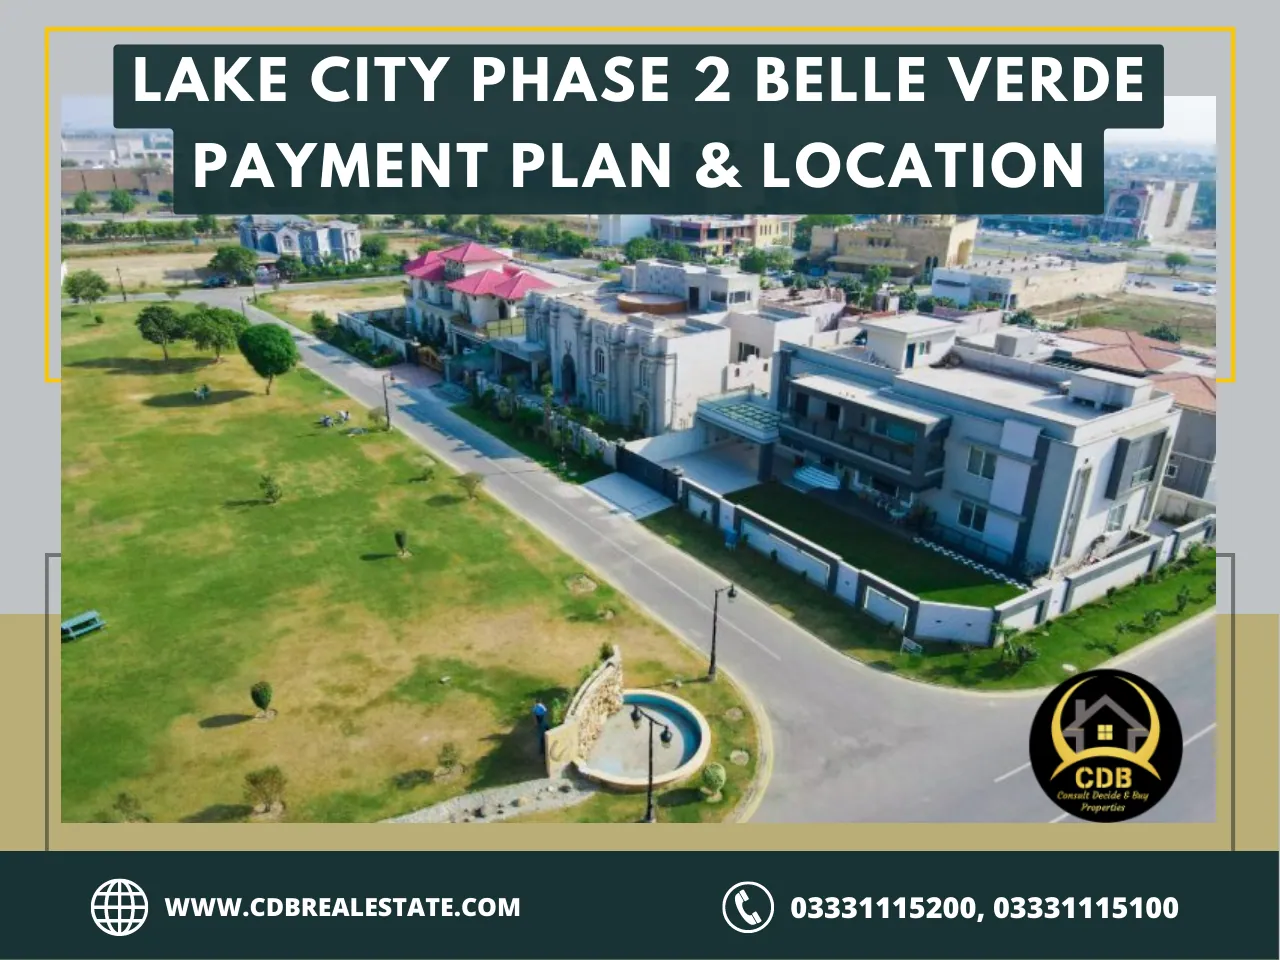 Houses and park in Lake City Phase 2 Belle Verde